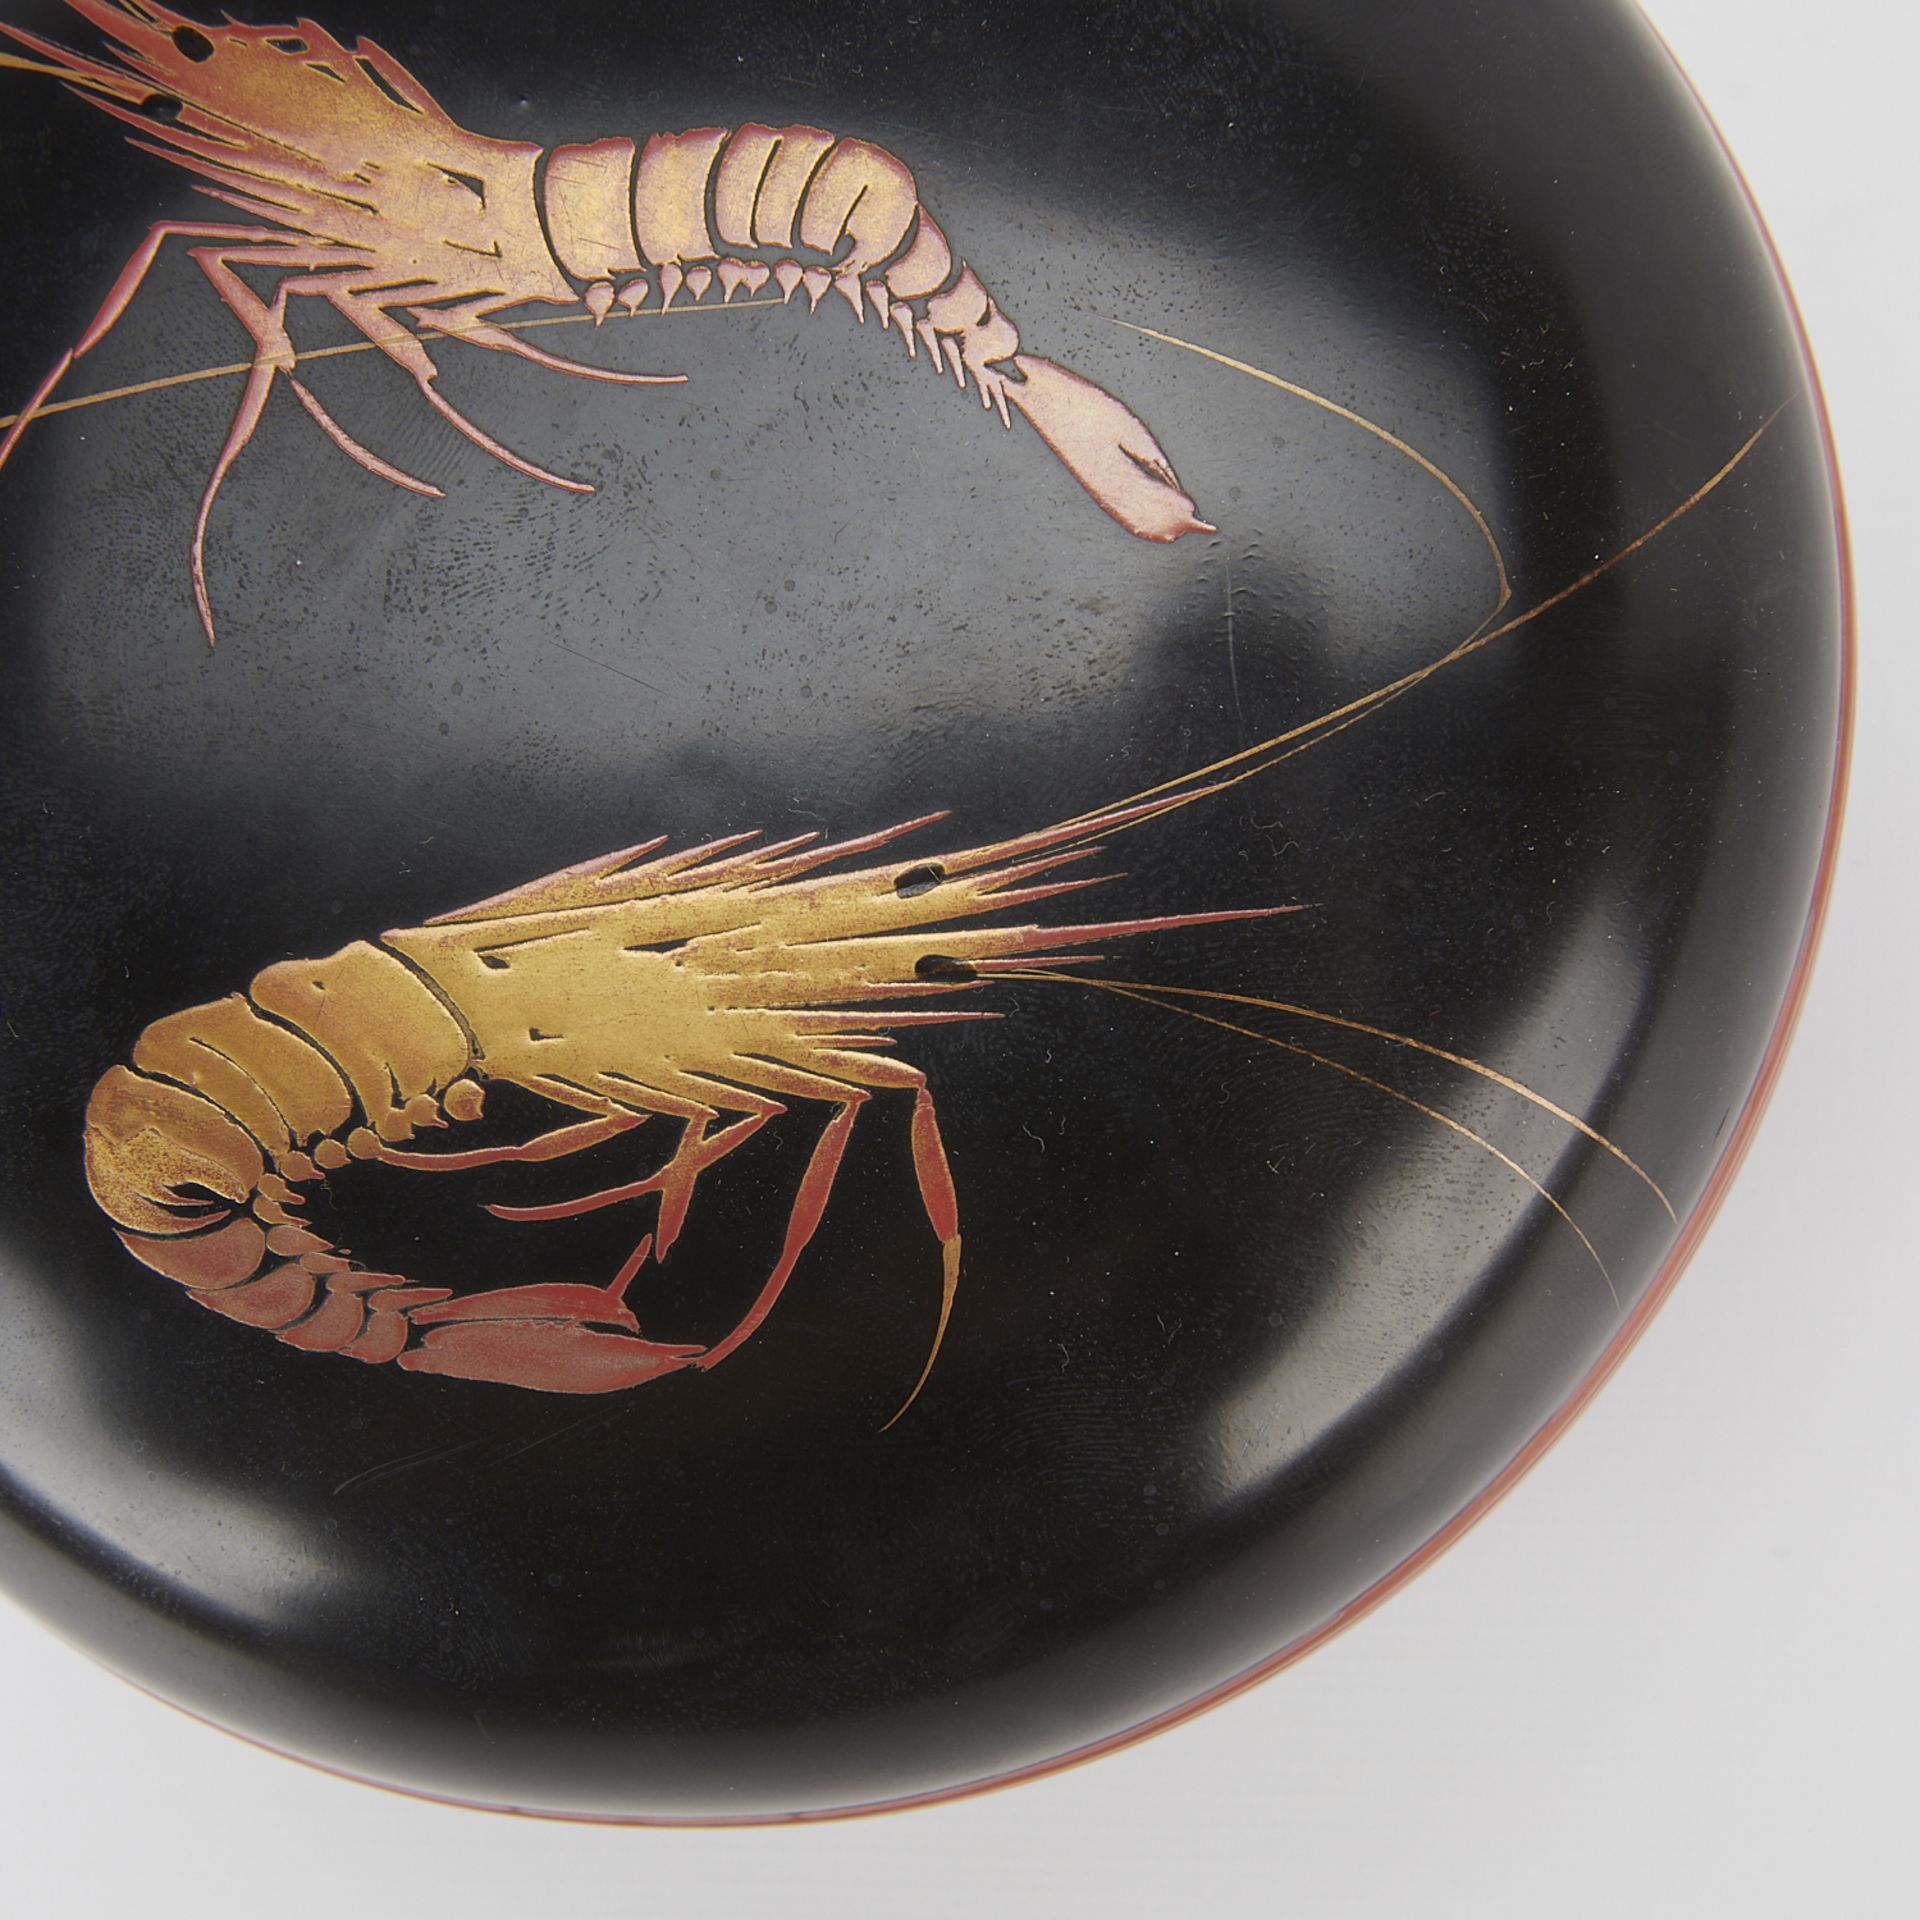 2 Japanese Lacquerware Boxes w/ Crustaceans - Image 9 of 17